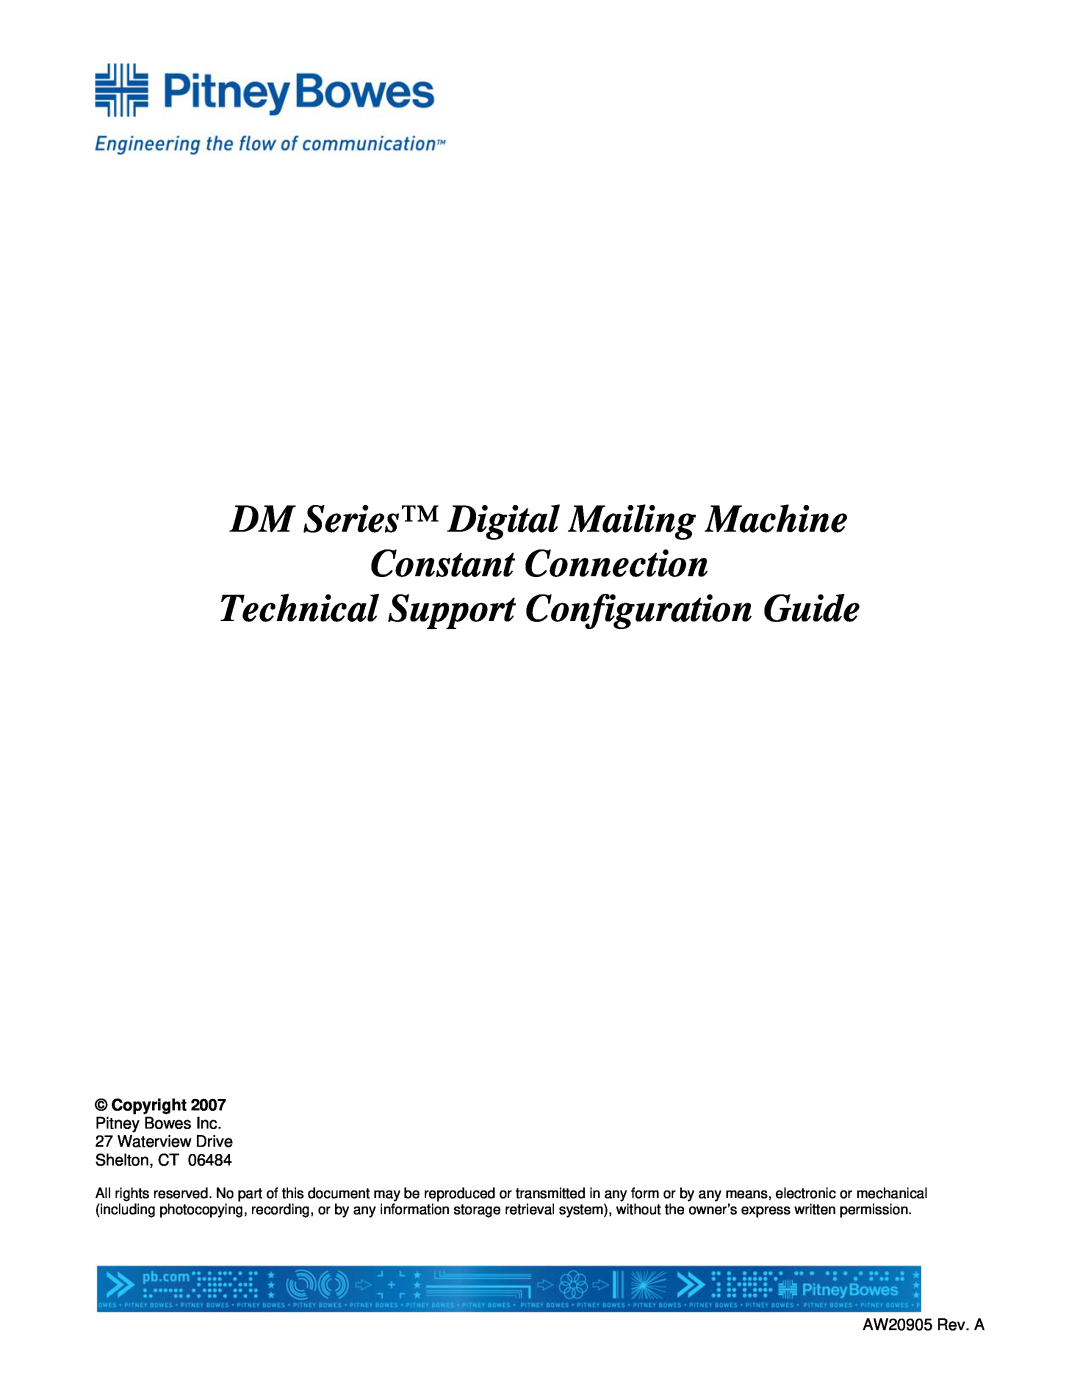 Pitney Bowes AW20905 manual DM Series Digital Mailing Machine Constant Connection, Technical Support Configuration Guide 